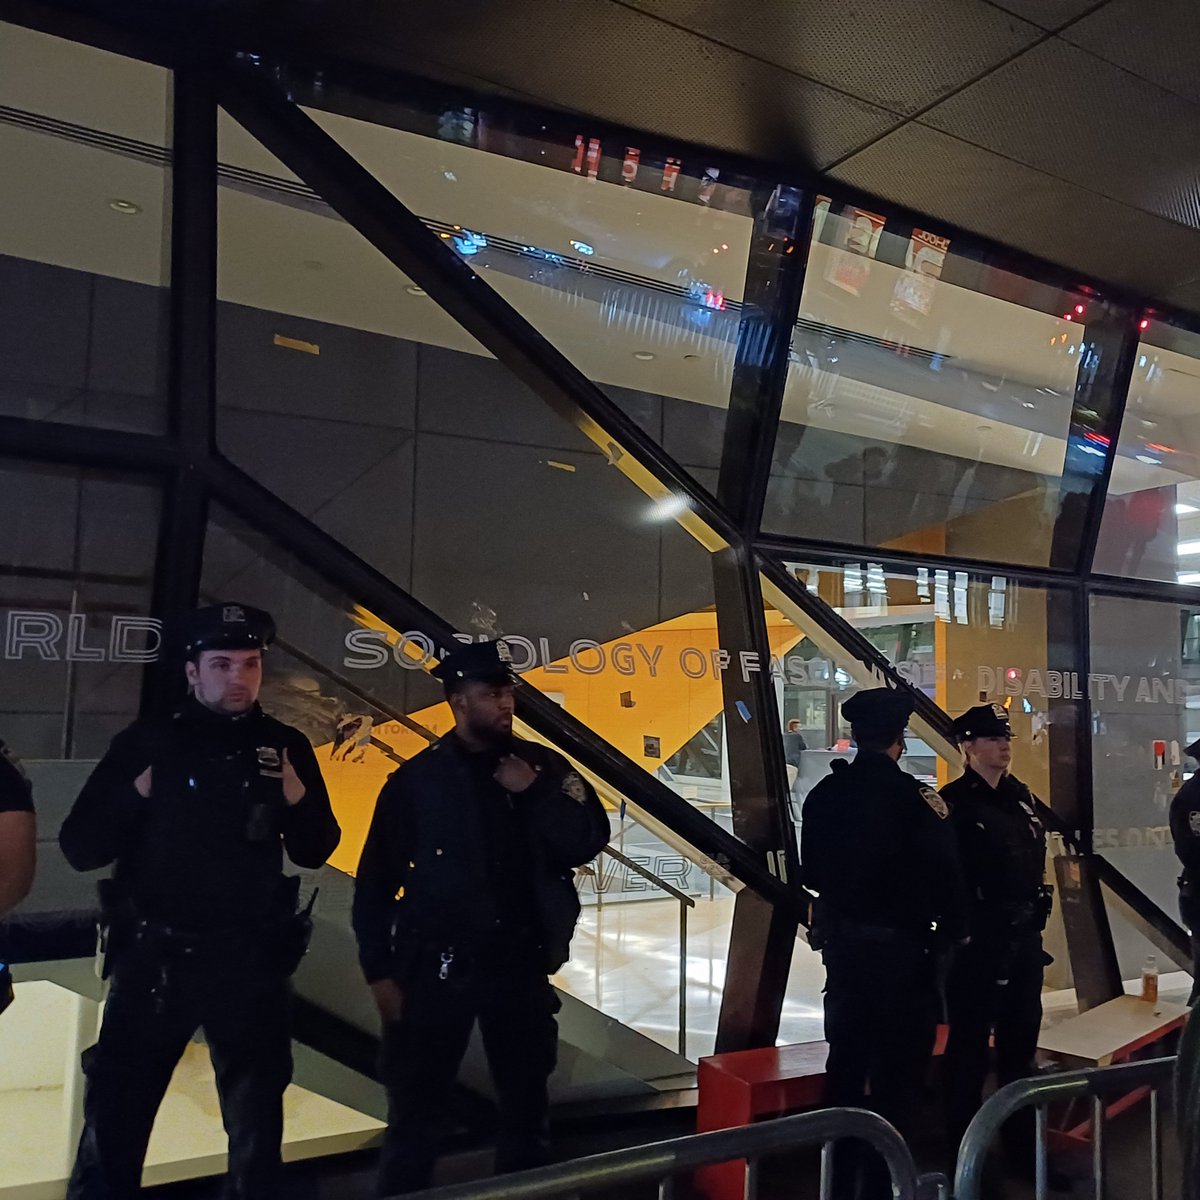 The police are, amusingly, standing in front of a window embossed with the phrase 'Sociology of Fascism' one of many terms meant to evoke the @thenewschool brand of 'critical thought' allied with 'social justice': an increasingly hollow sales pitch.